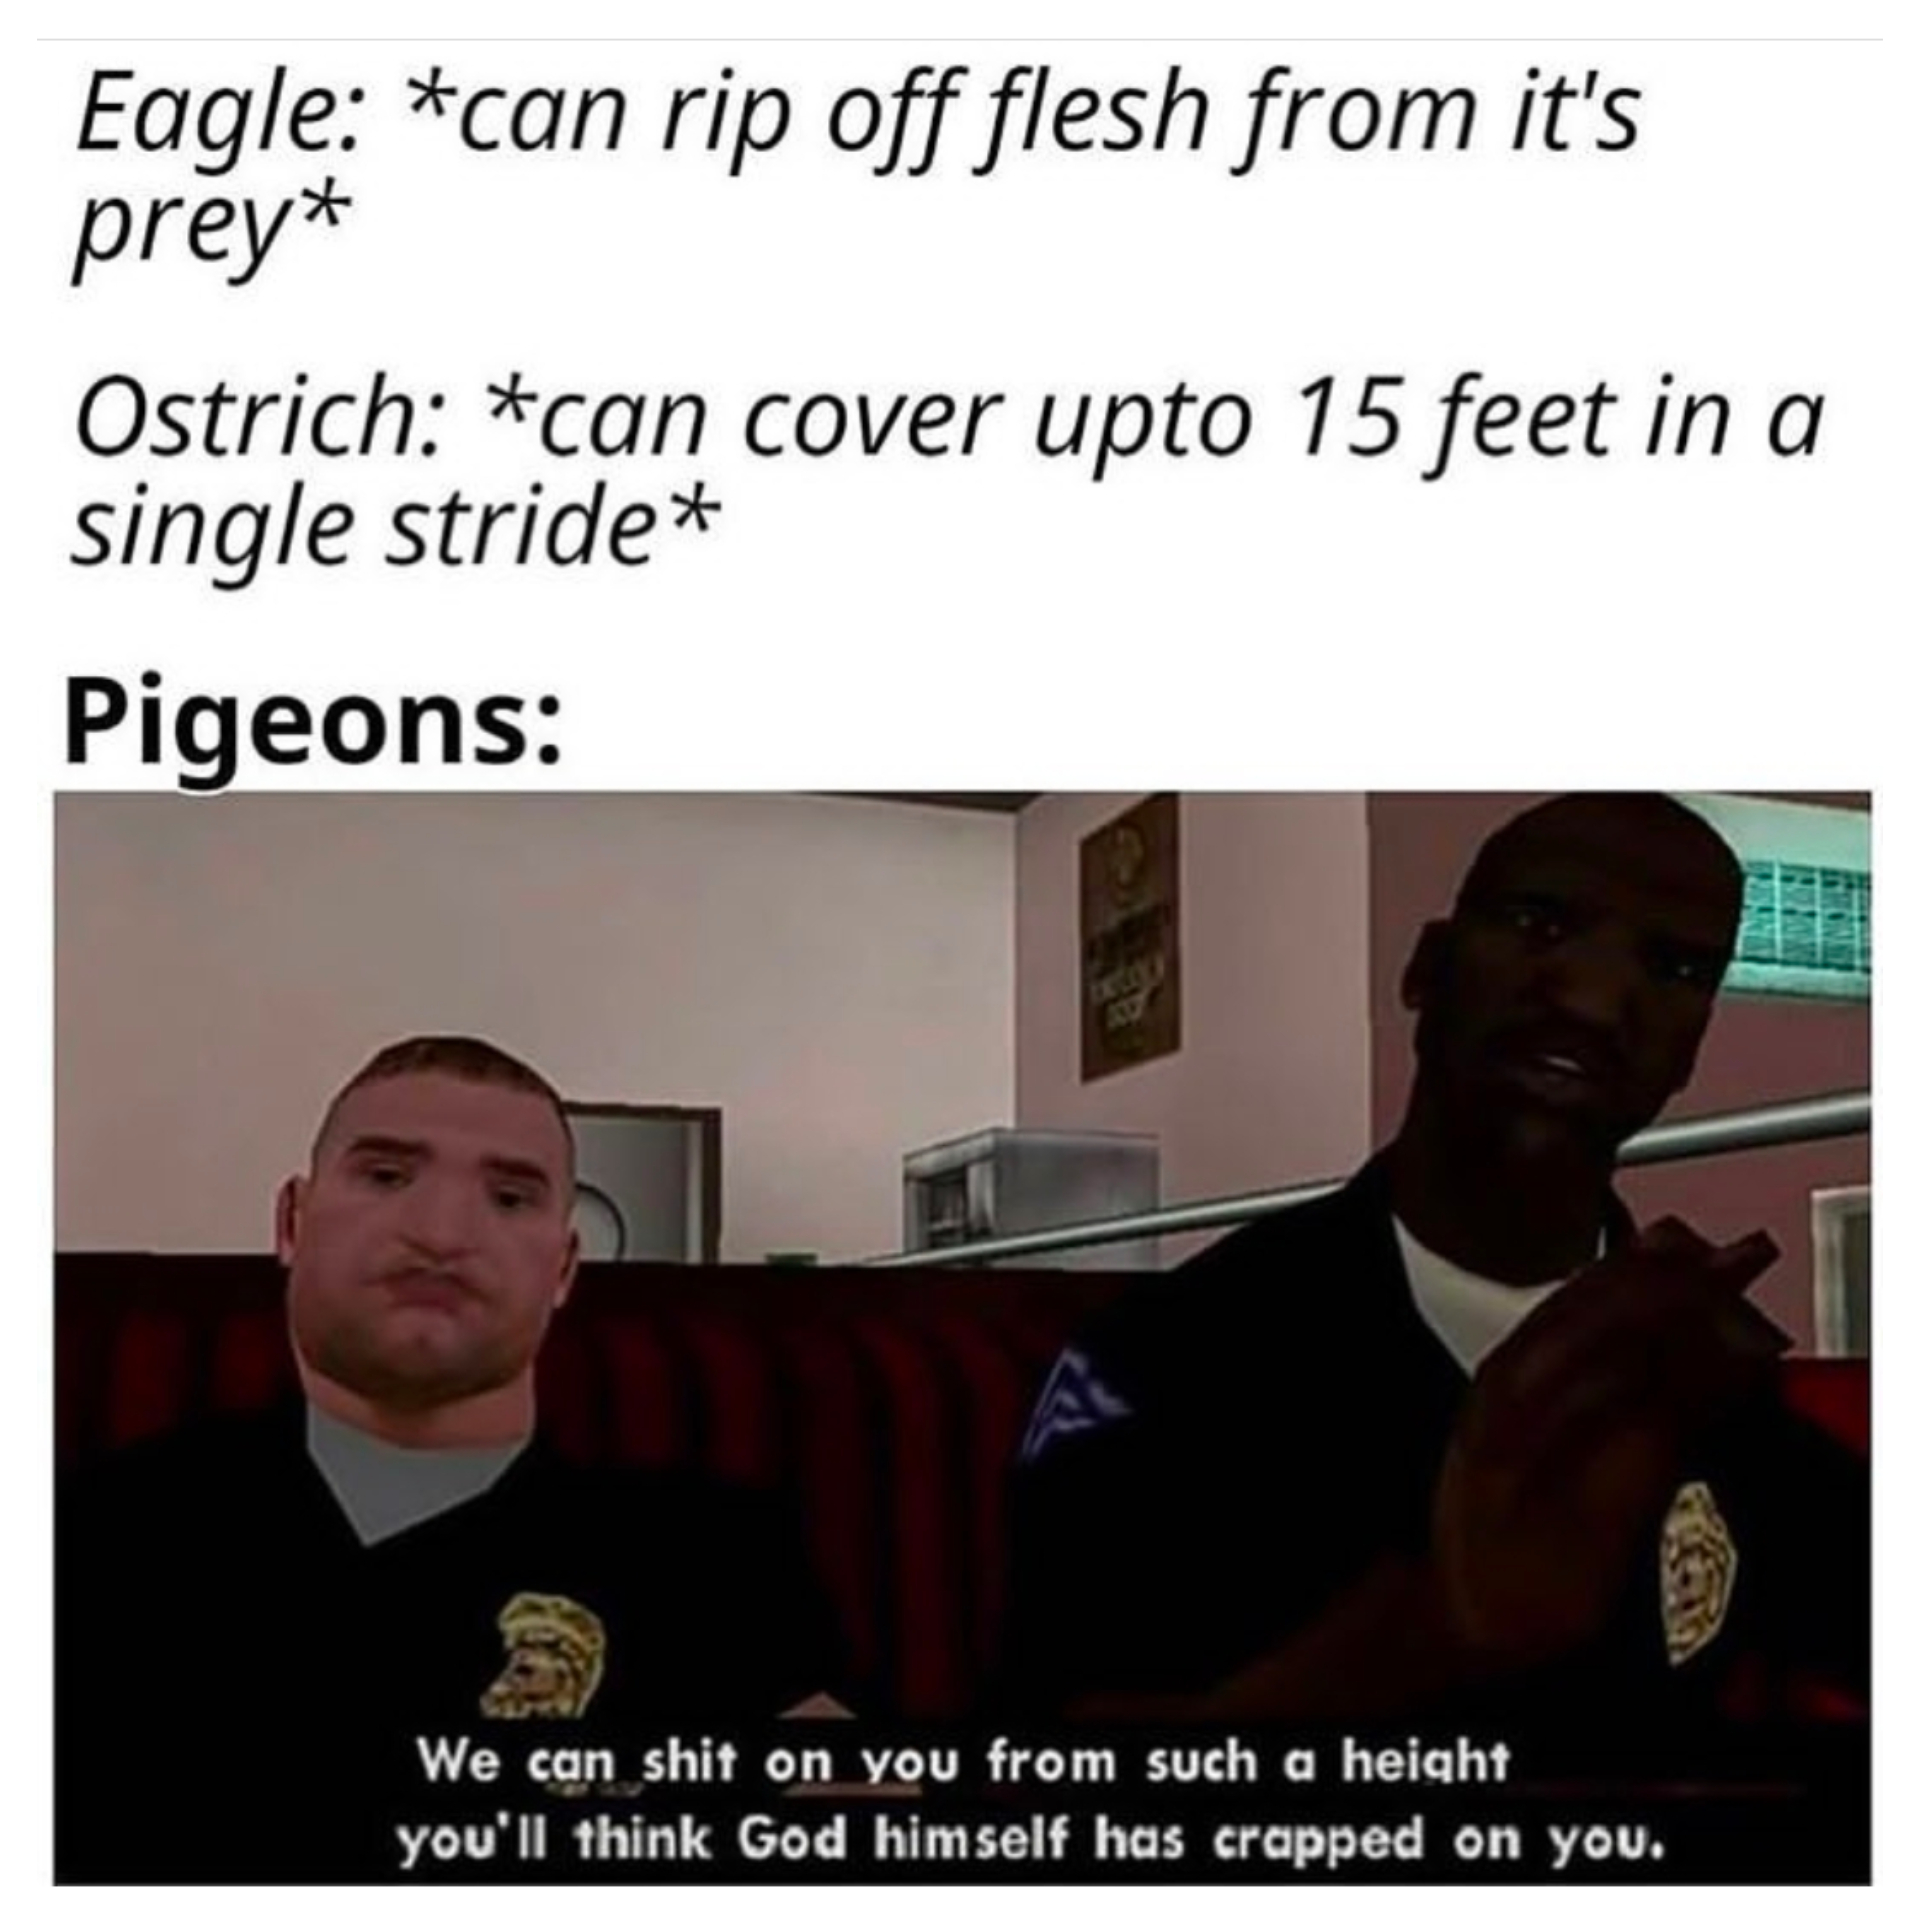 pigeon gta meme - Eagle can rip off flesh from it's prey Ostrich can cover upto 15 feet in a single stride Pigeons We can shit on you from such a height you'll think God himself has crapped on you.